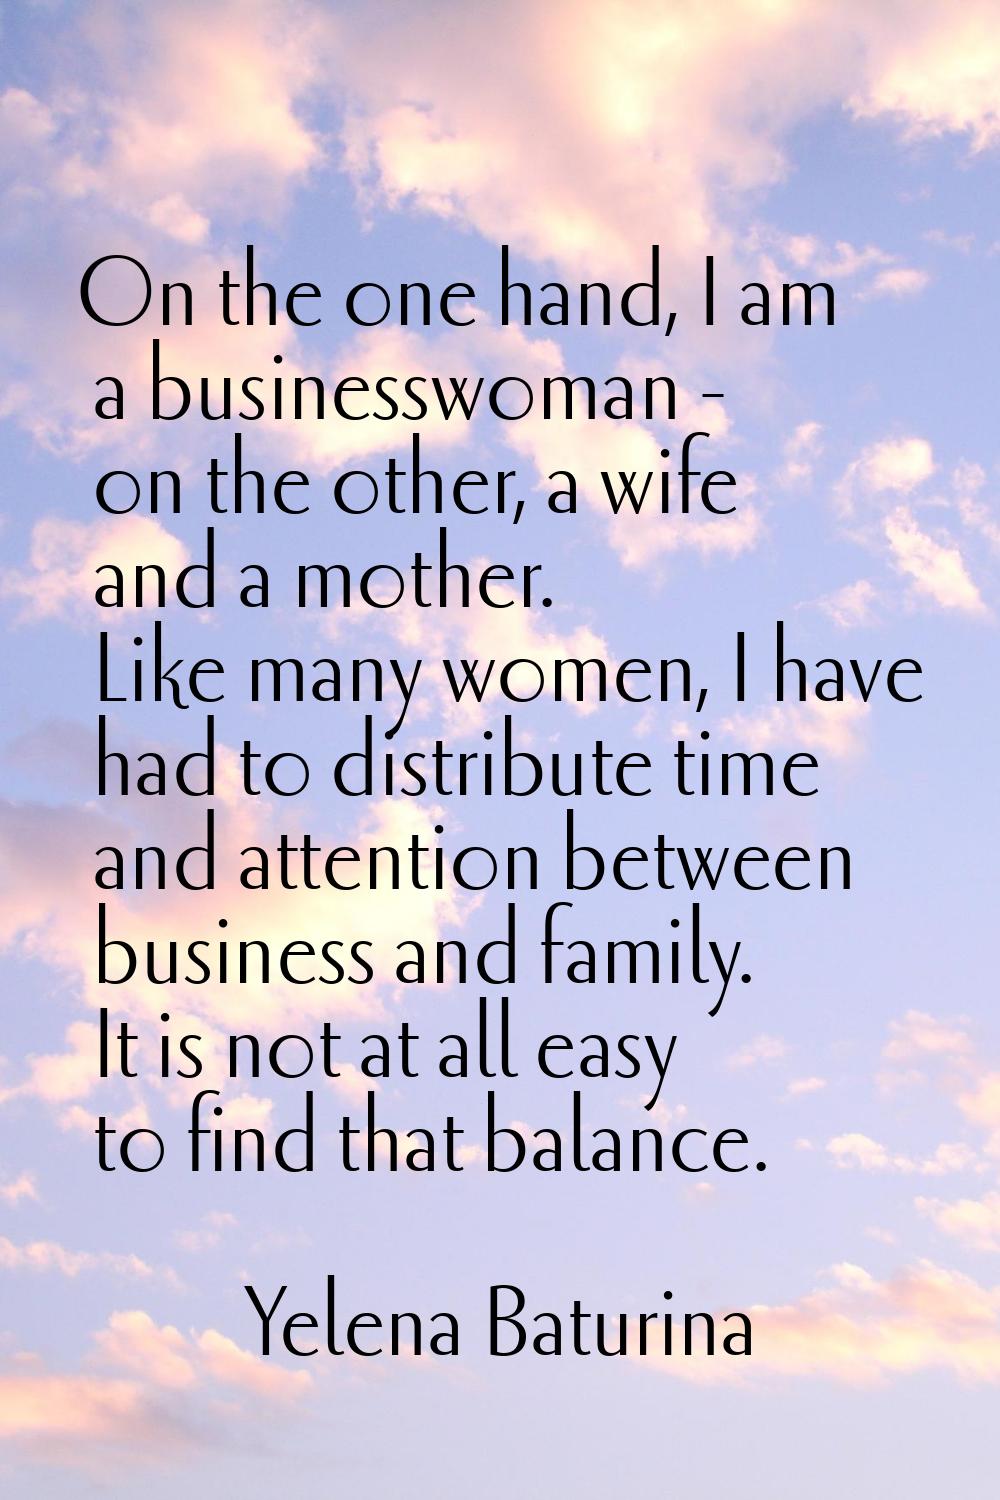 On the one hand, I am a businesswoman - on the other, a wife and a mother. Like many women, I have 